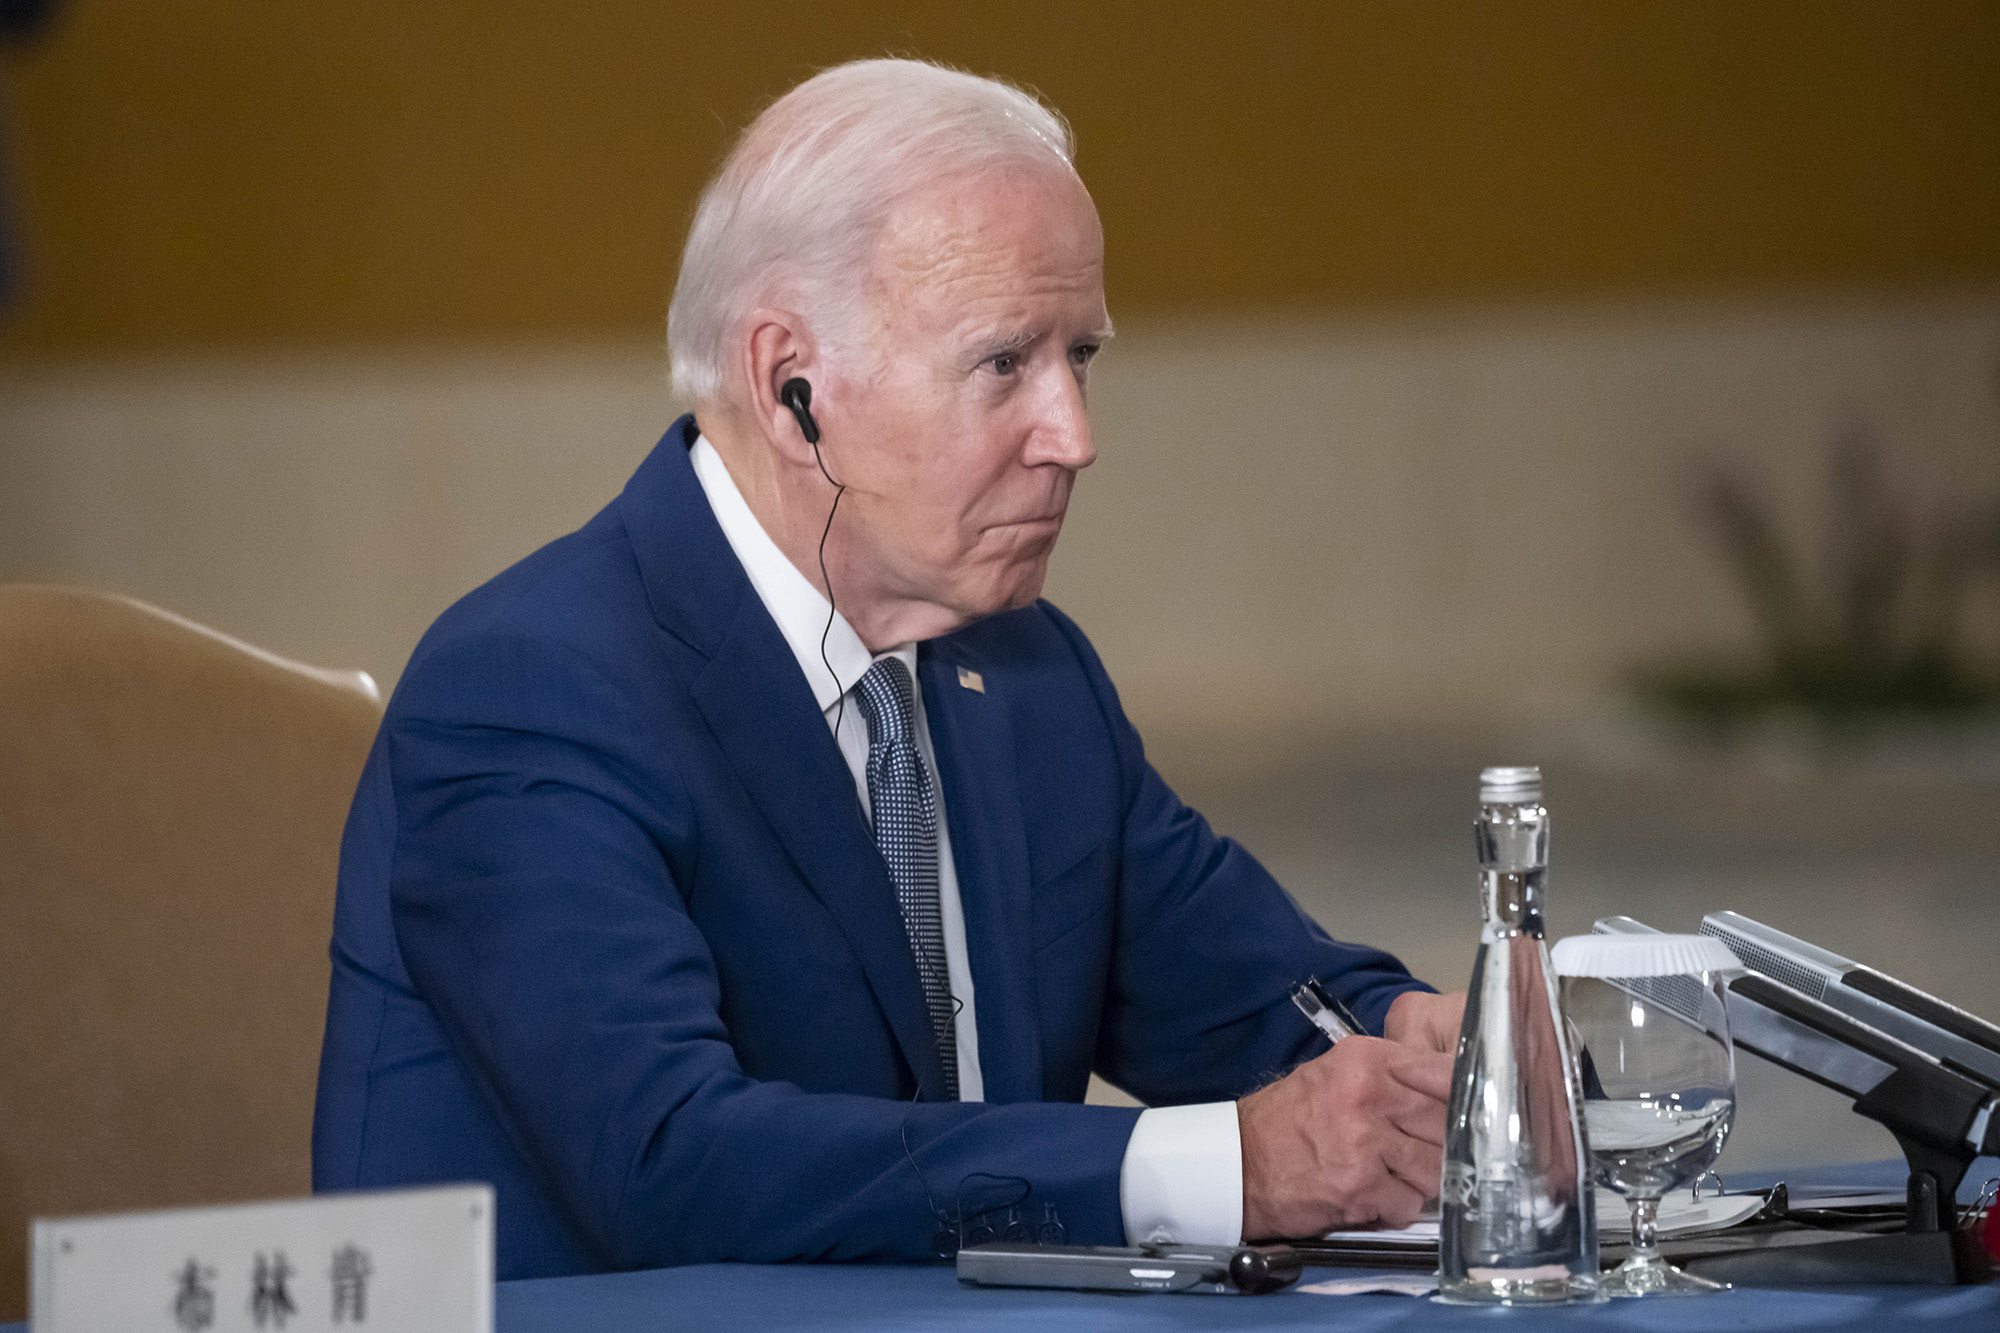 U.S. President Joe Biden listens during a meeting with Chinese President Xi Jinping on the sidelines of the G20 summit meeting in Bali, Indonesia, on November 14.